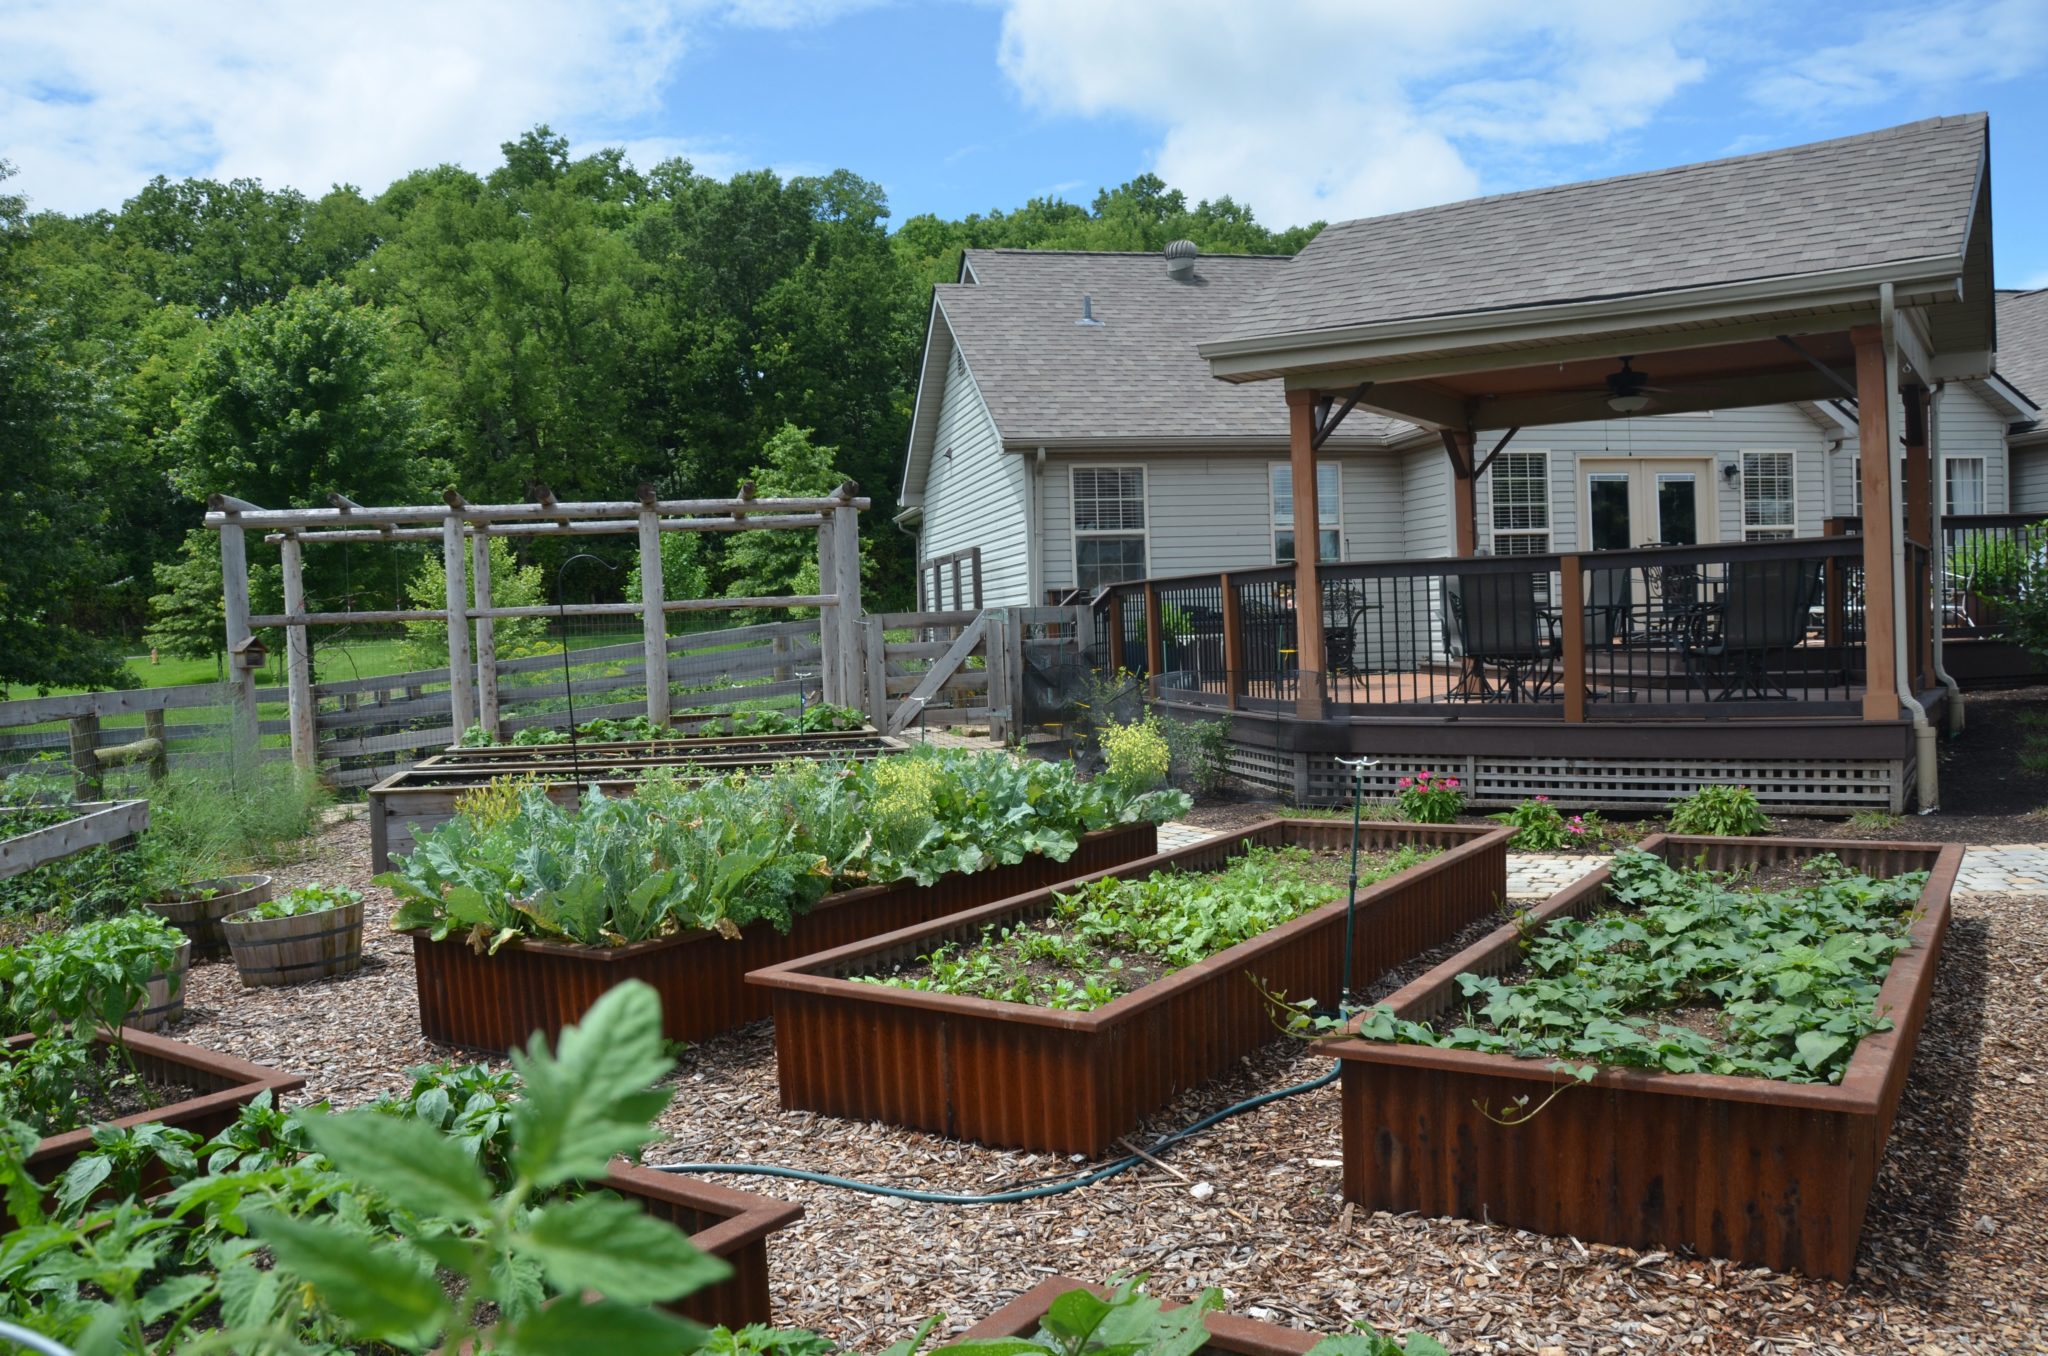 The Raised Beds Provide Ample Room For A Kitchen Garden Complete With Fruits Vegetables And Herbs. 2048x1356 